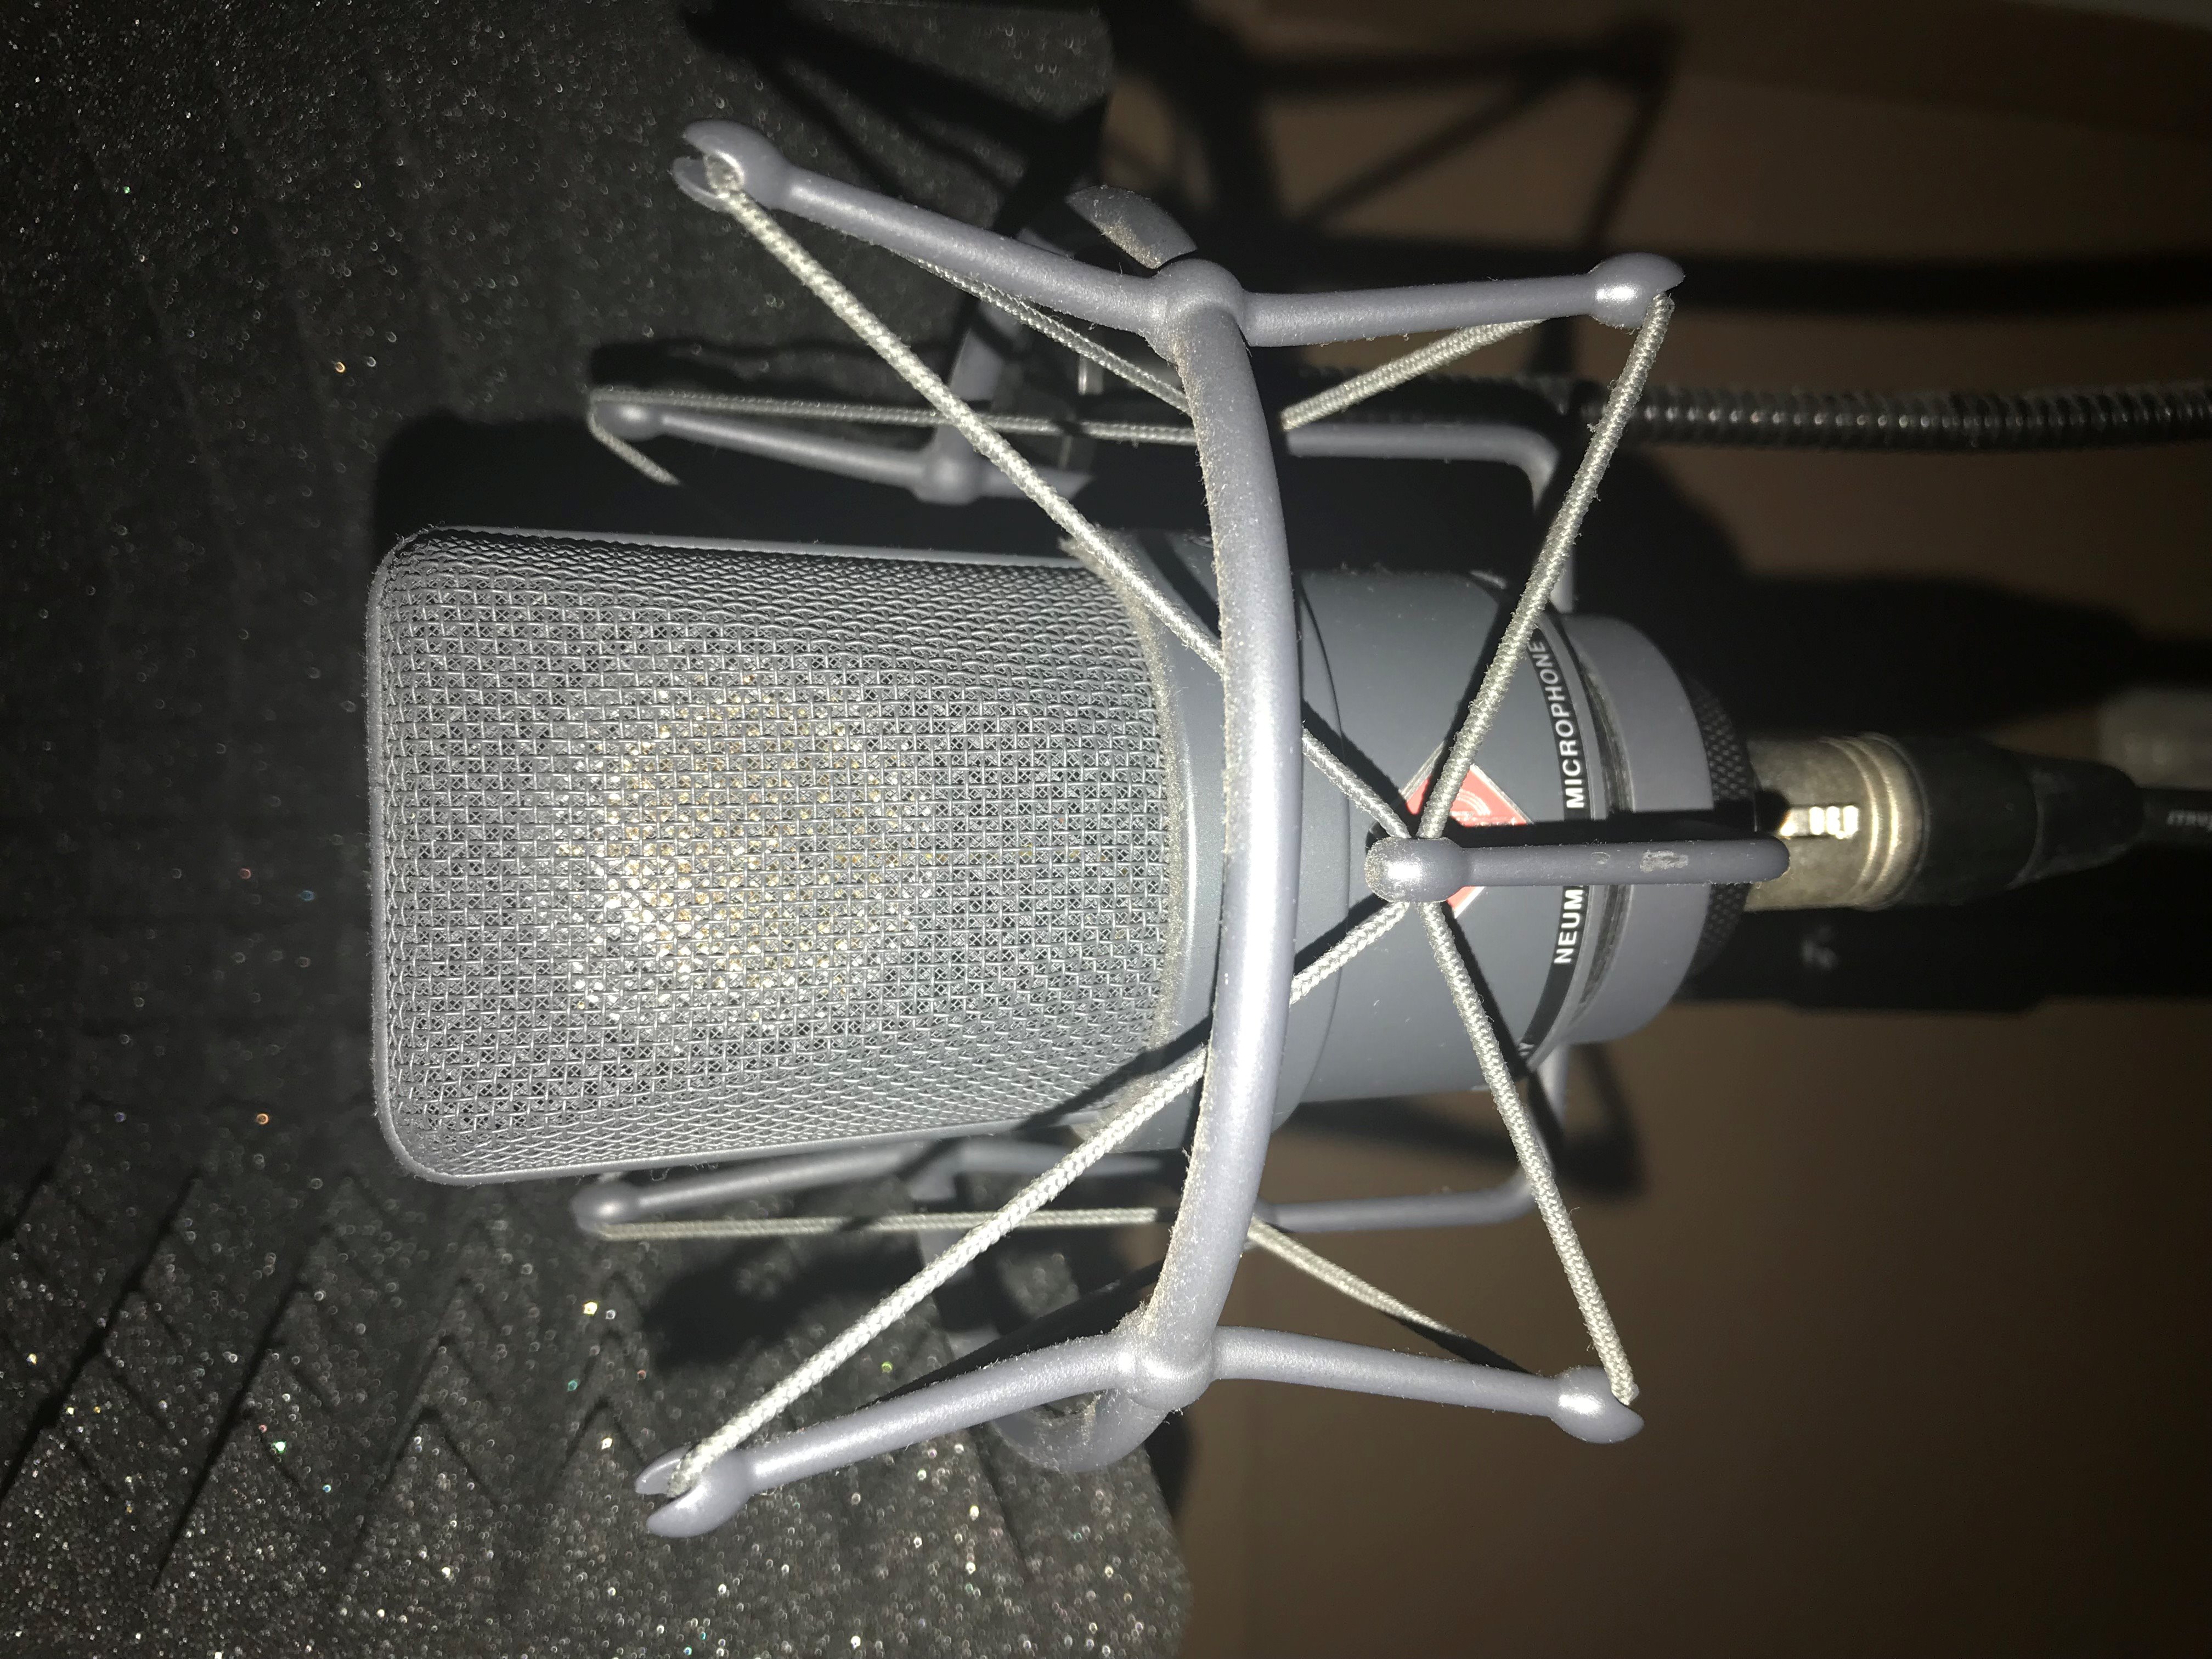 Condenser Microphone - Neumann TLM 103 with shock mount and case